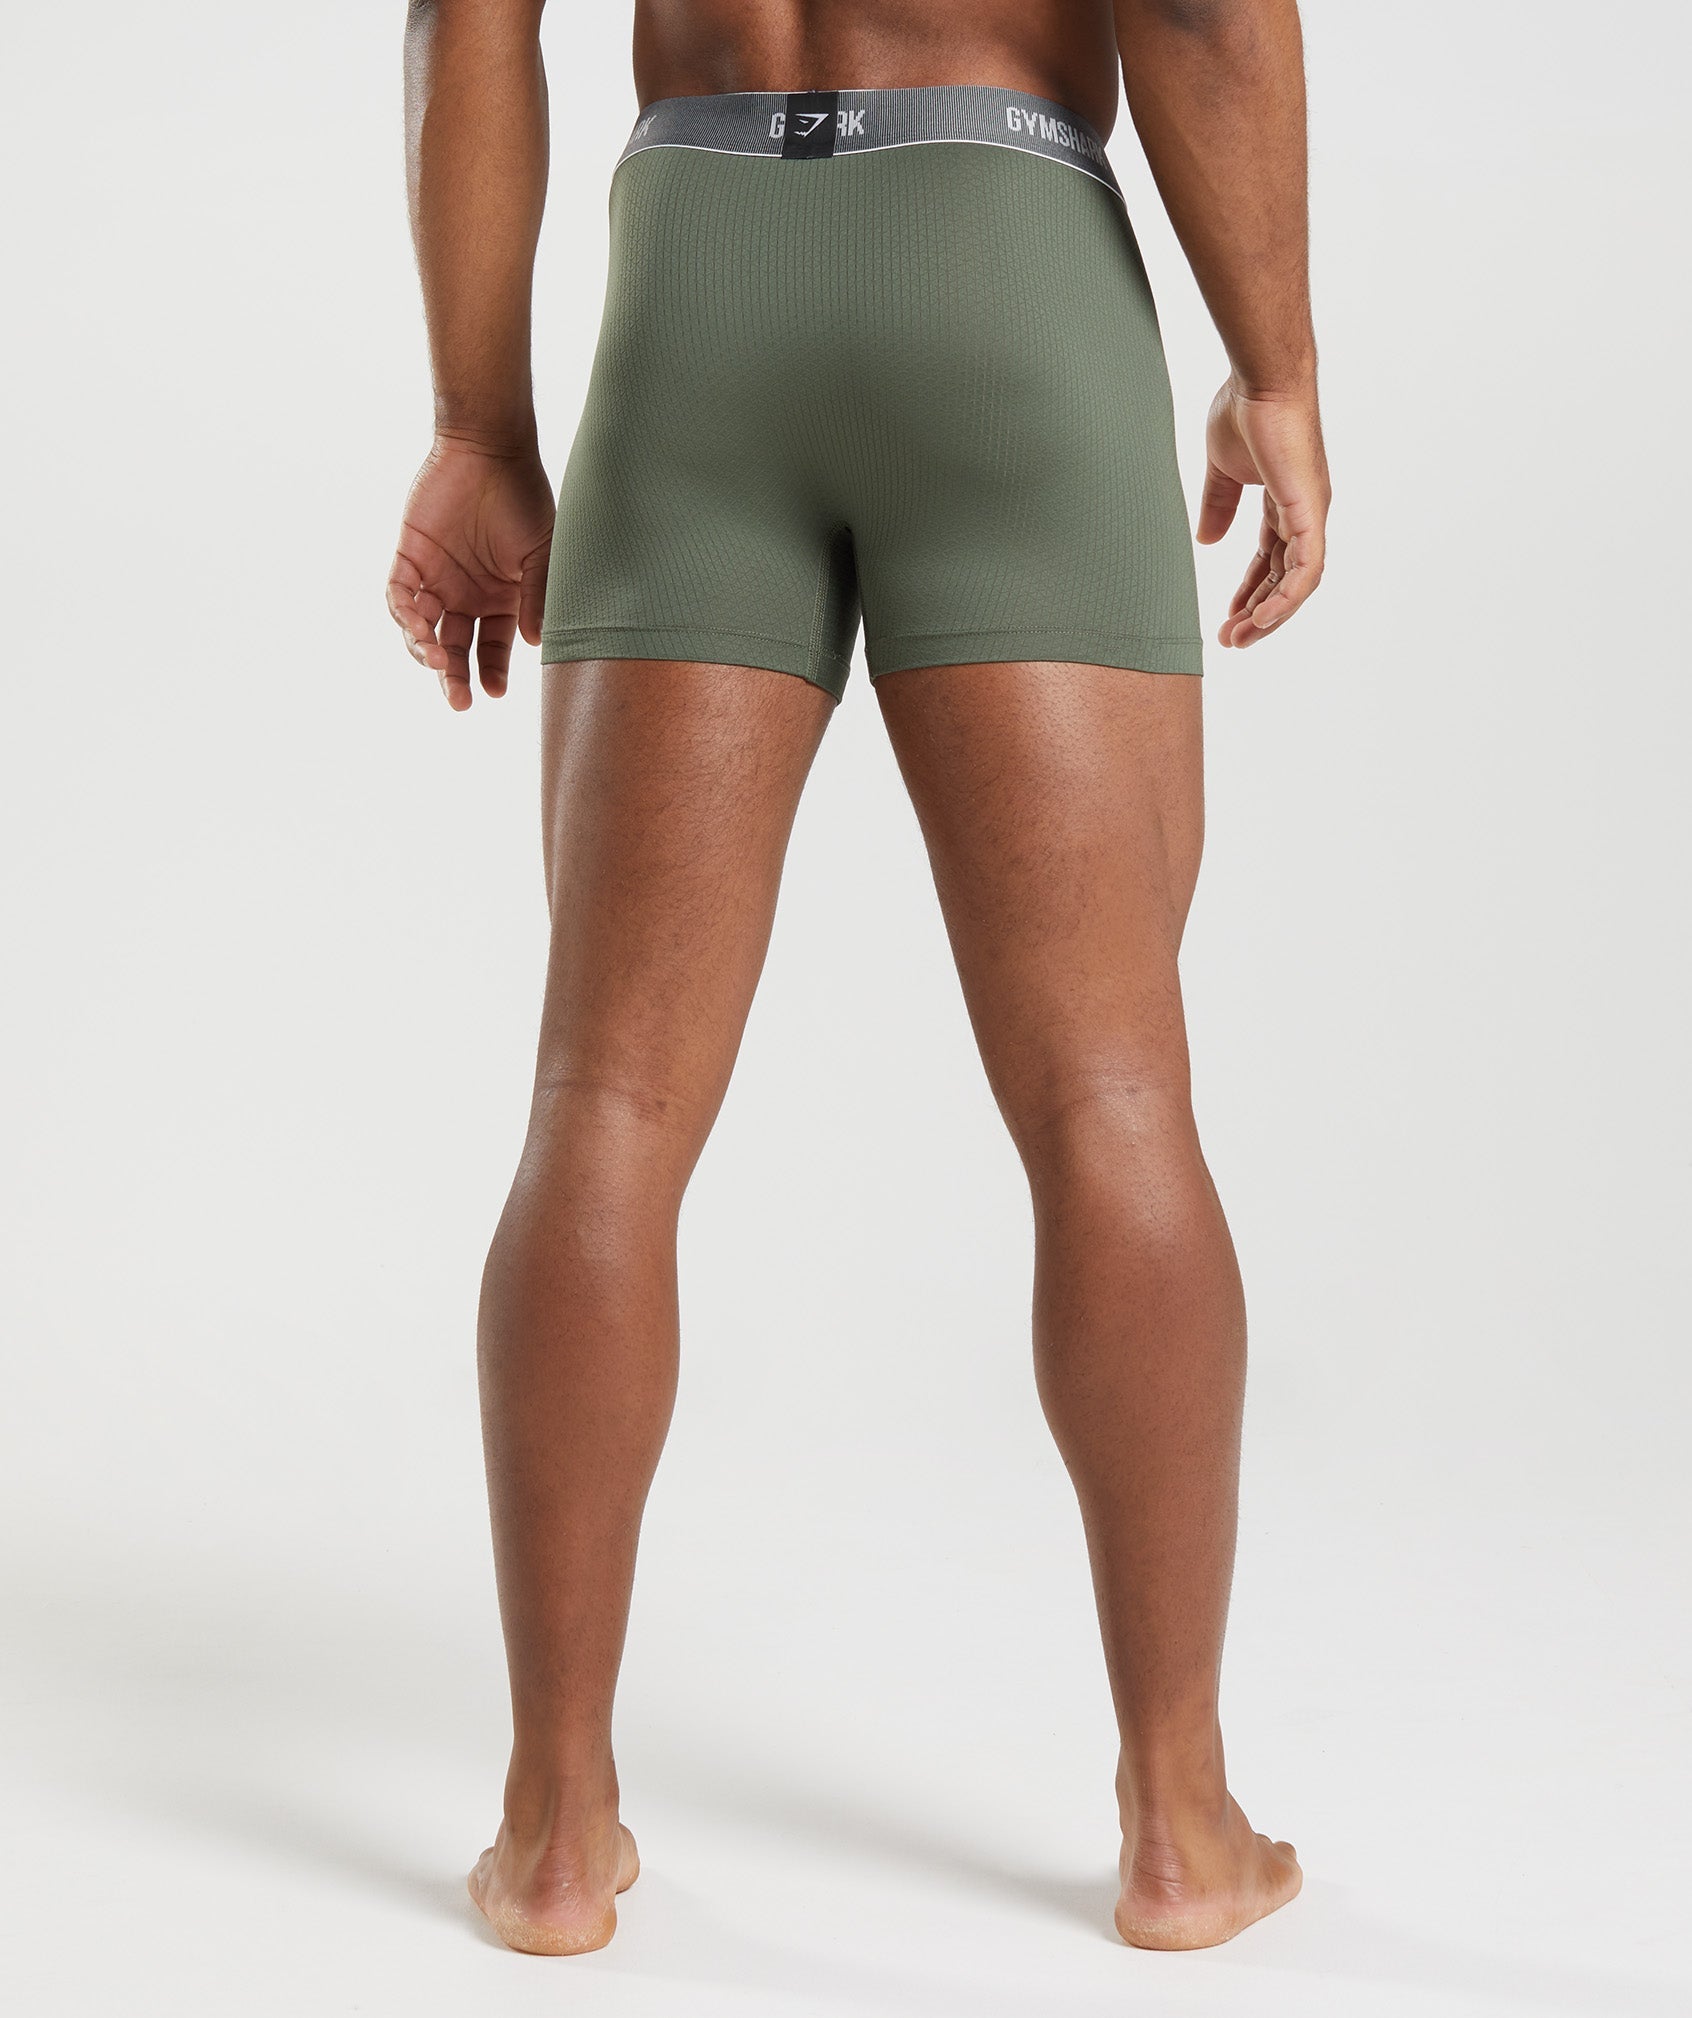 Sports Tech Boxers 2pk in Black/Core Olive - view 3